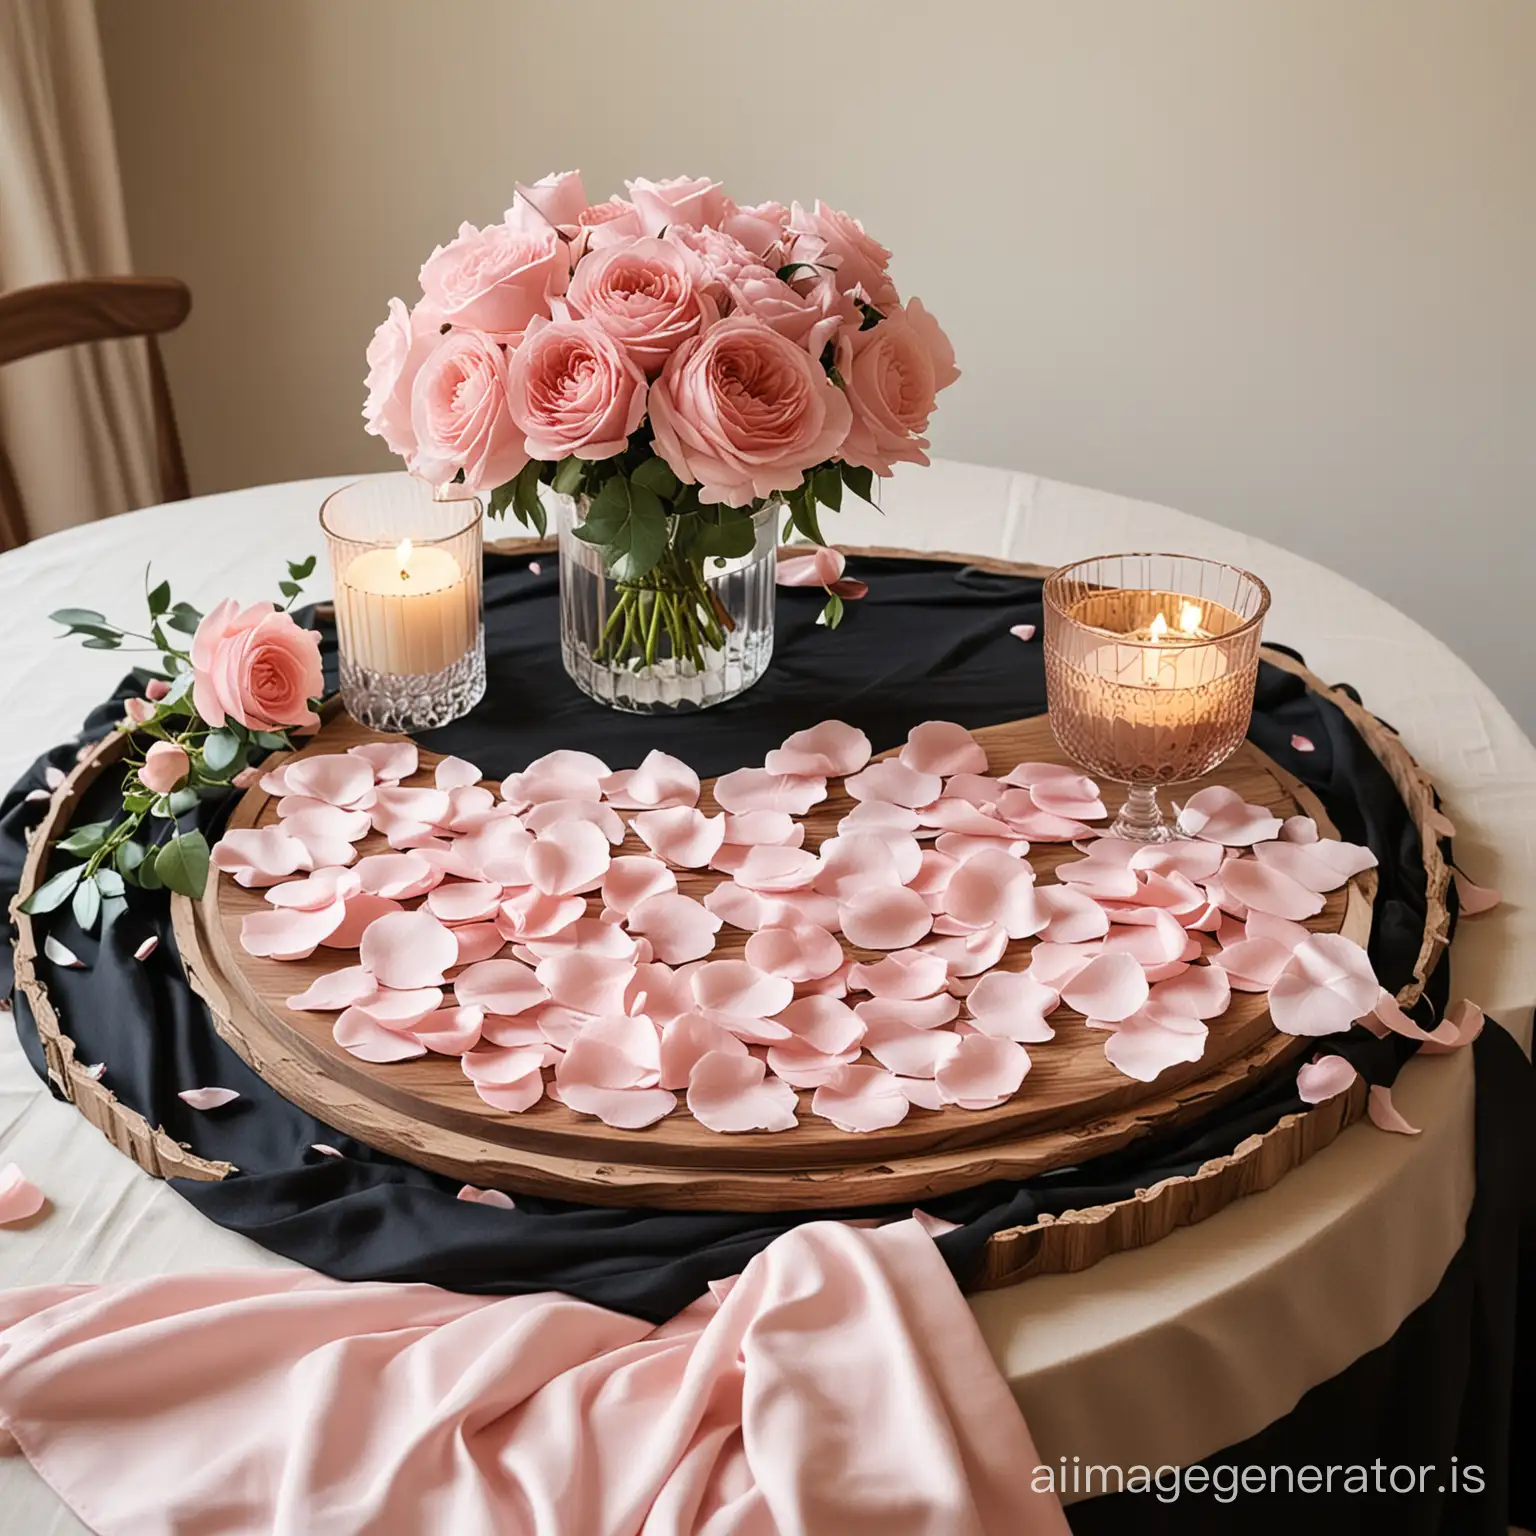 Romantic-Cocktail-Table-Decor-with-Blush-Pink-Rose-Petals